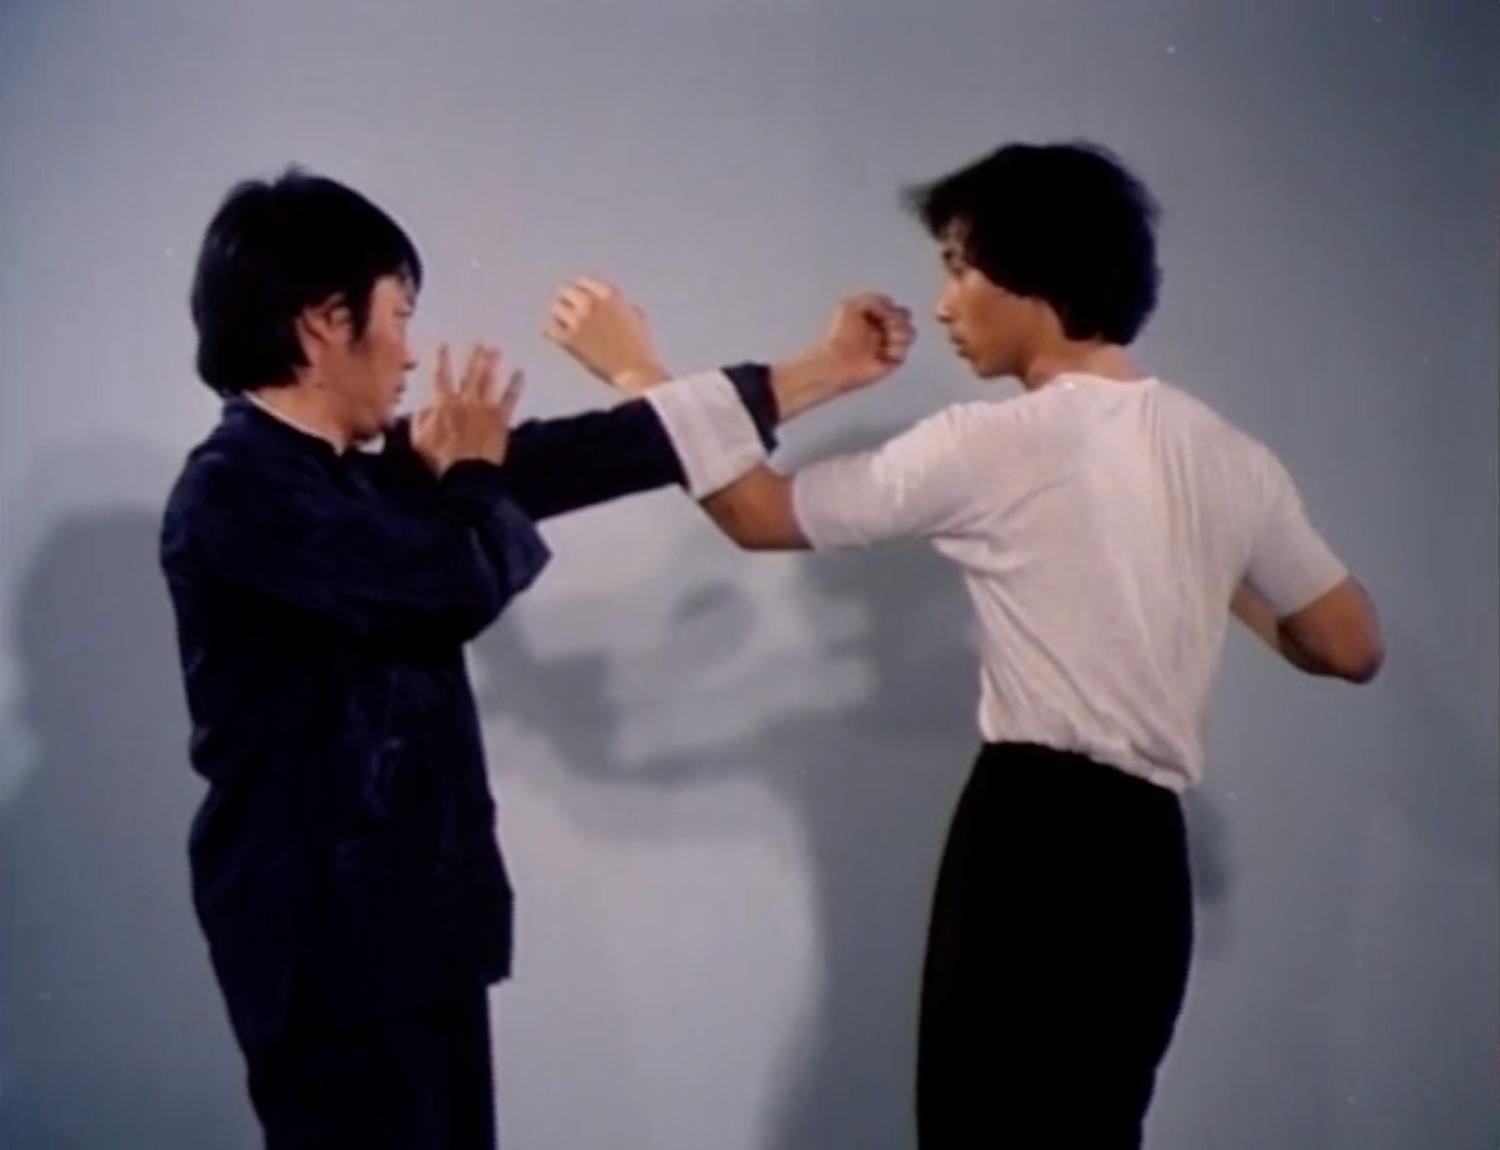 Wing Chun Science of In-Fighting with Wong Shun Leung (Preowned) - Budovideos